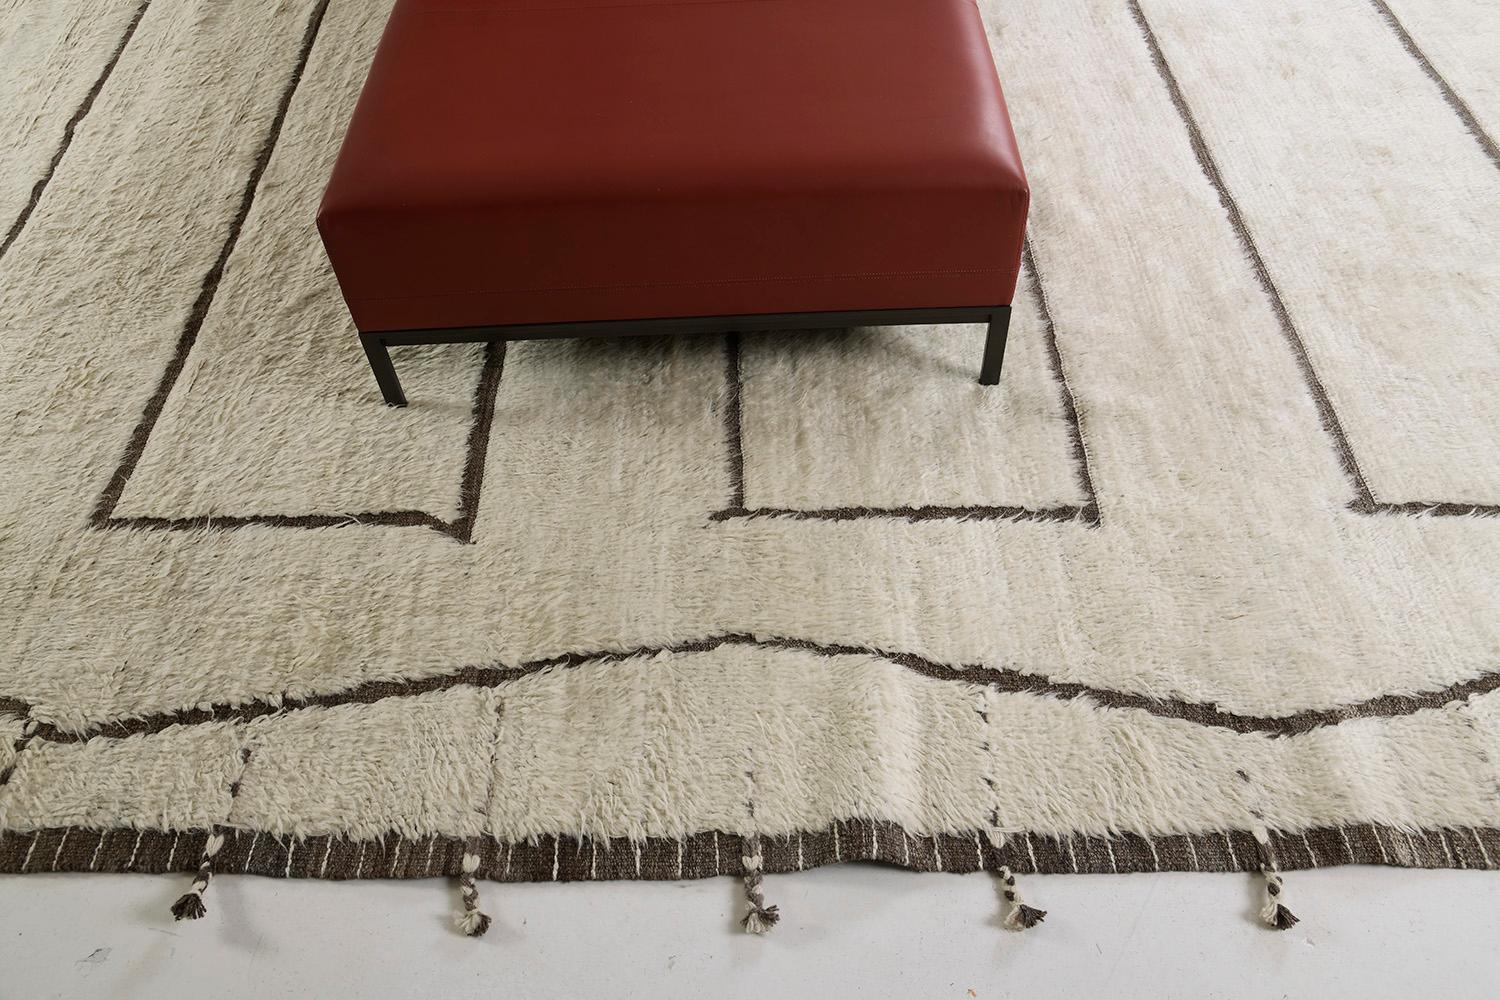 Cierzo is a signature collection of California. It is a handwoven luxurious wool rug made of remarkable natural brown design elements. Haute Bohemian collection: designed in Los Angeles named for the winds knitting together seasons, trees, dwellers